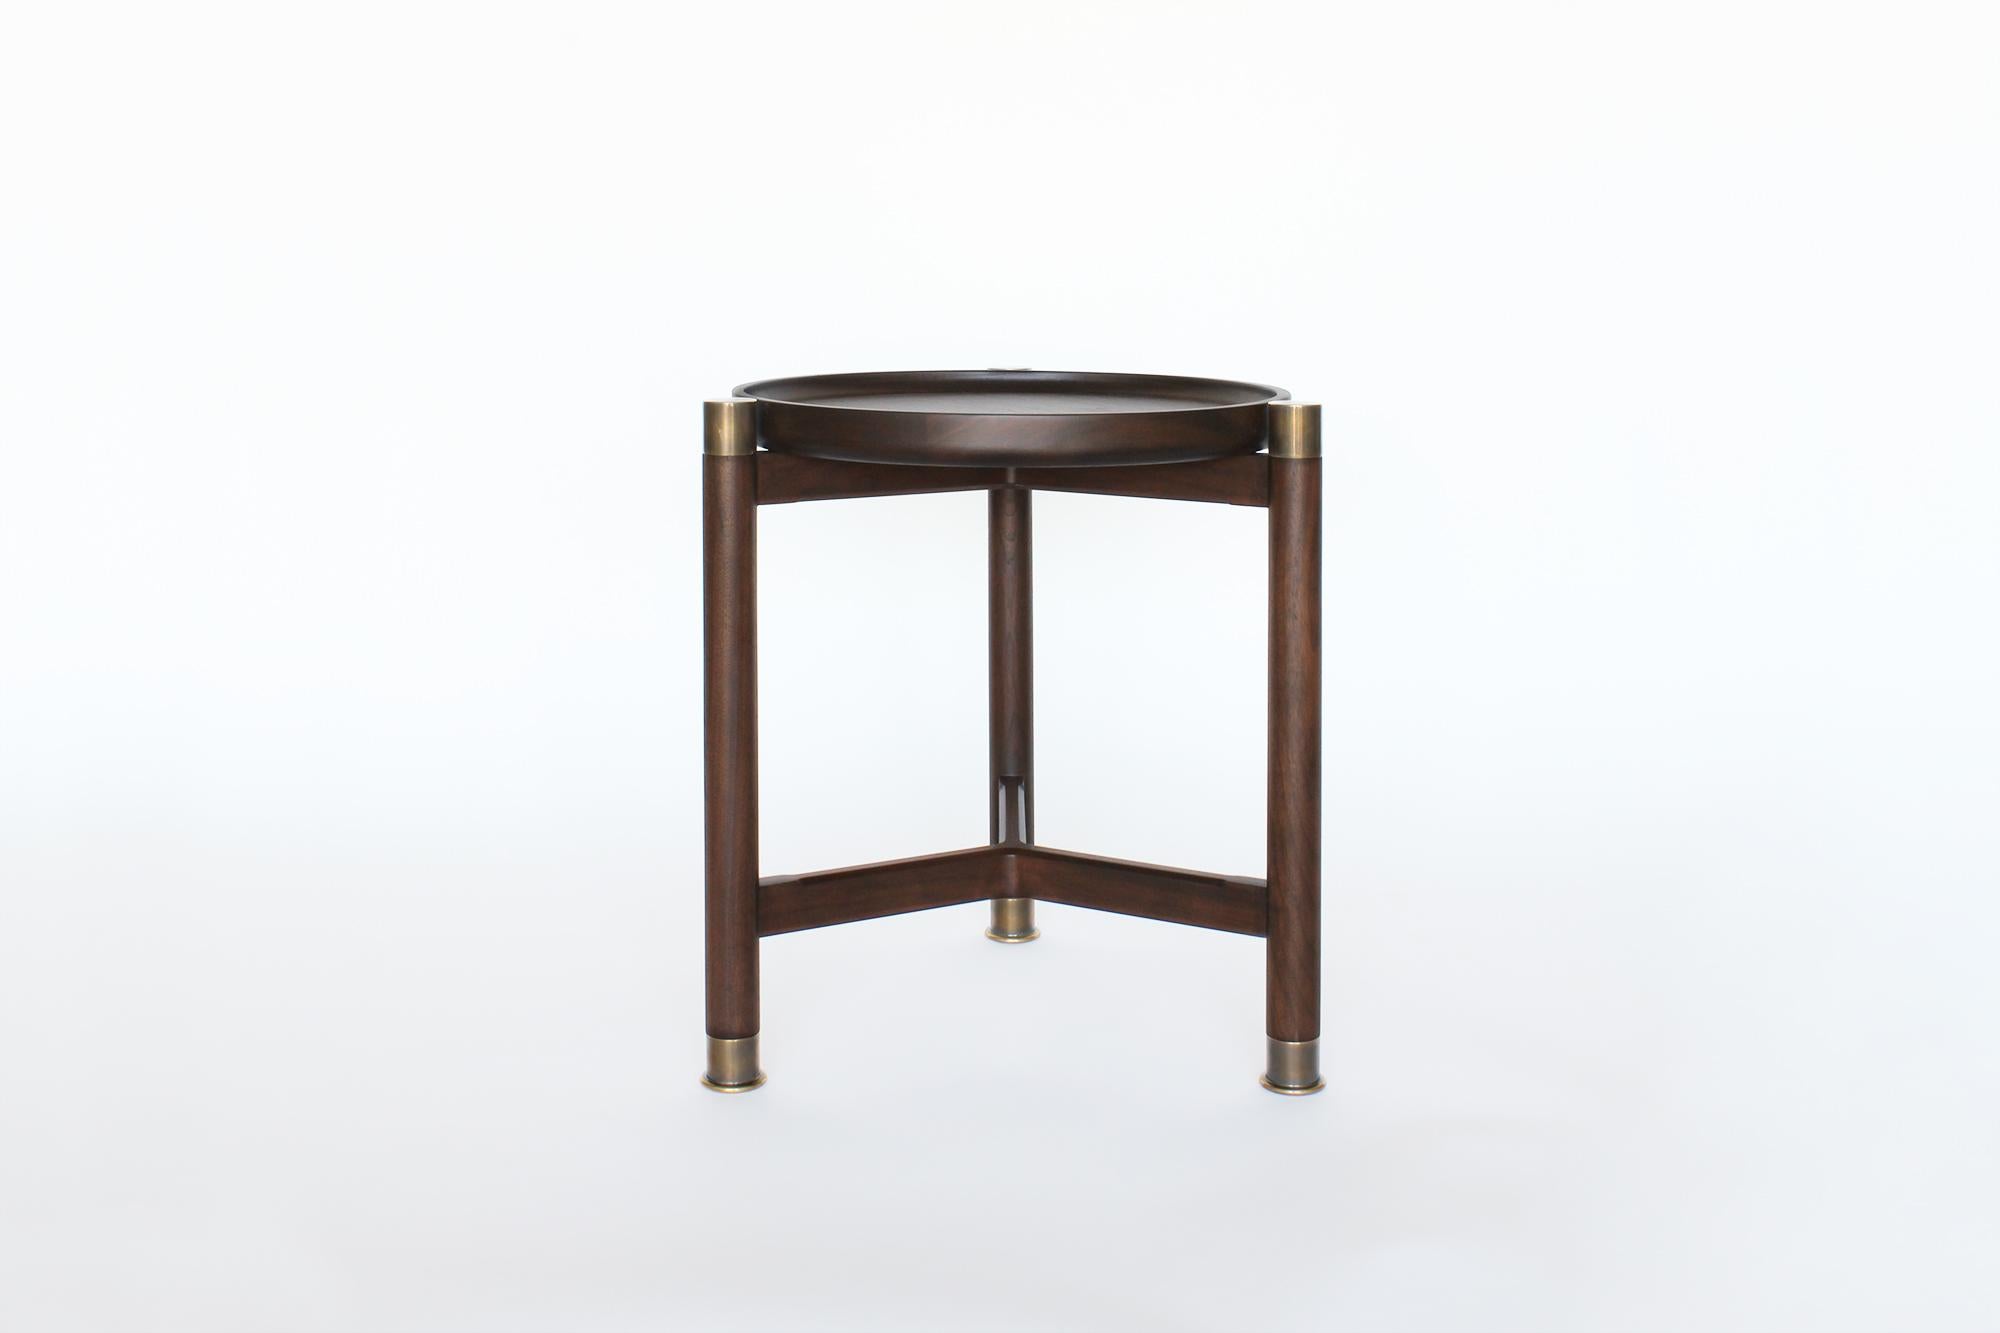 Otto Round Accent Table in Medium Walnut with Antique Brass Fittings In New Condition For Sale In Los Angeles, CA